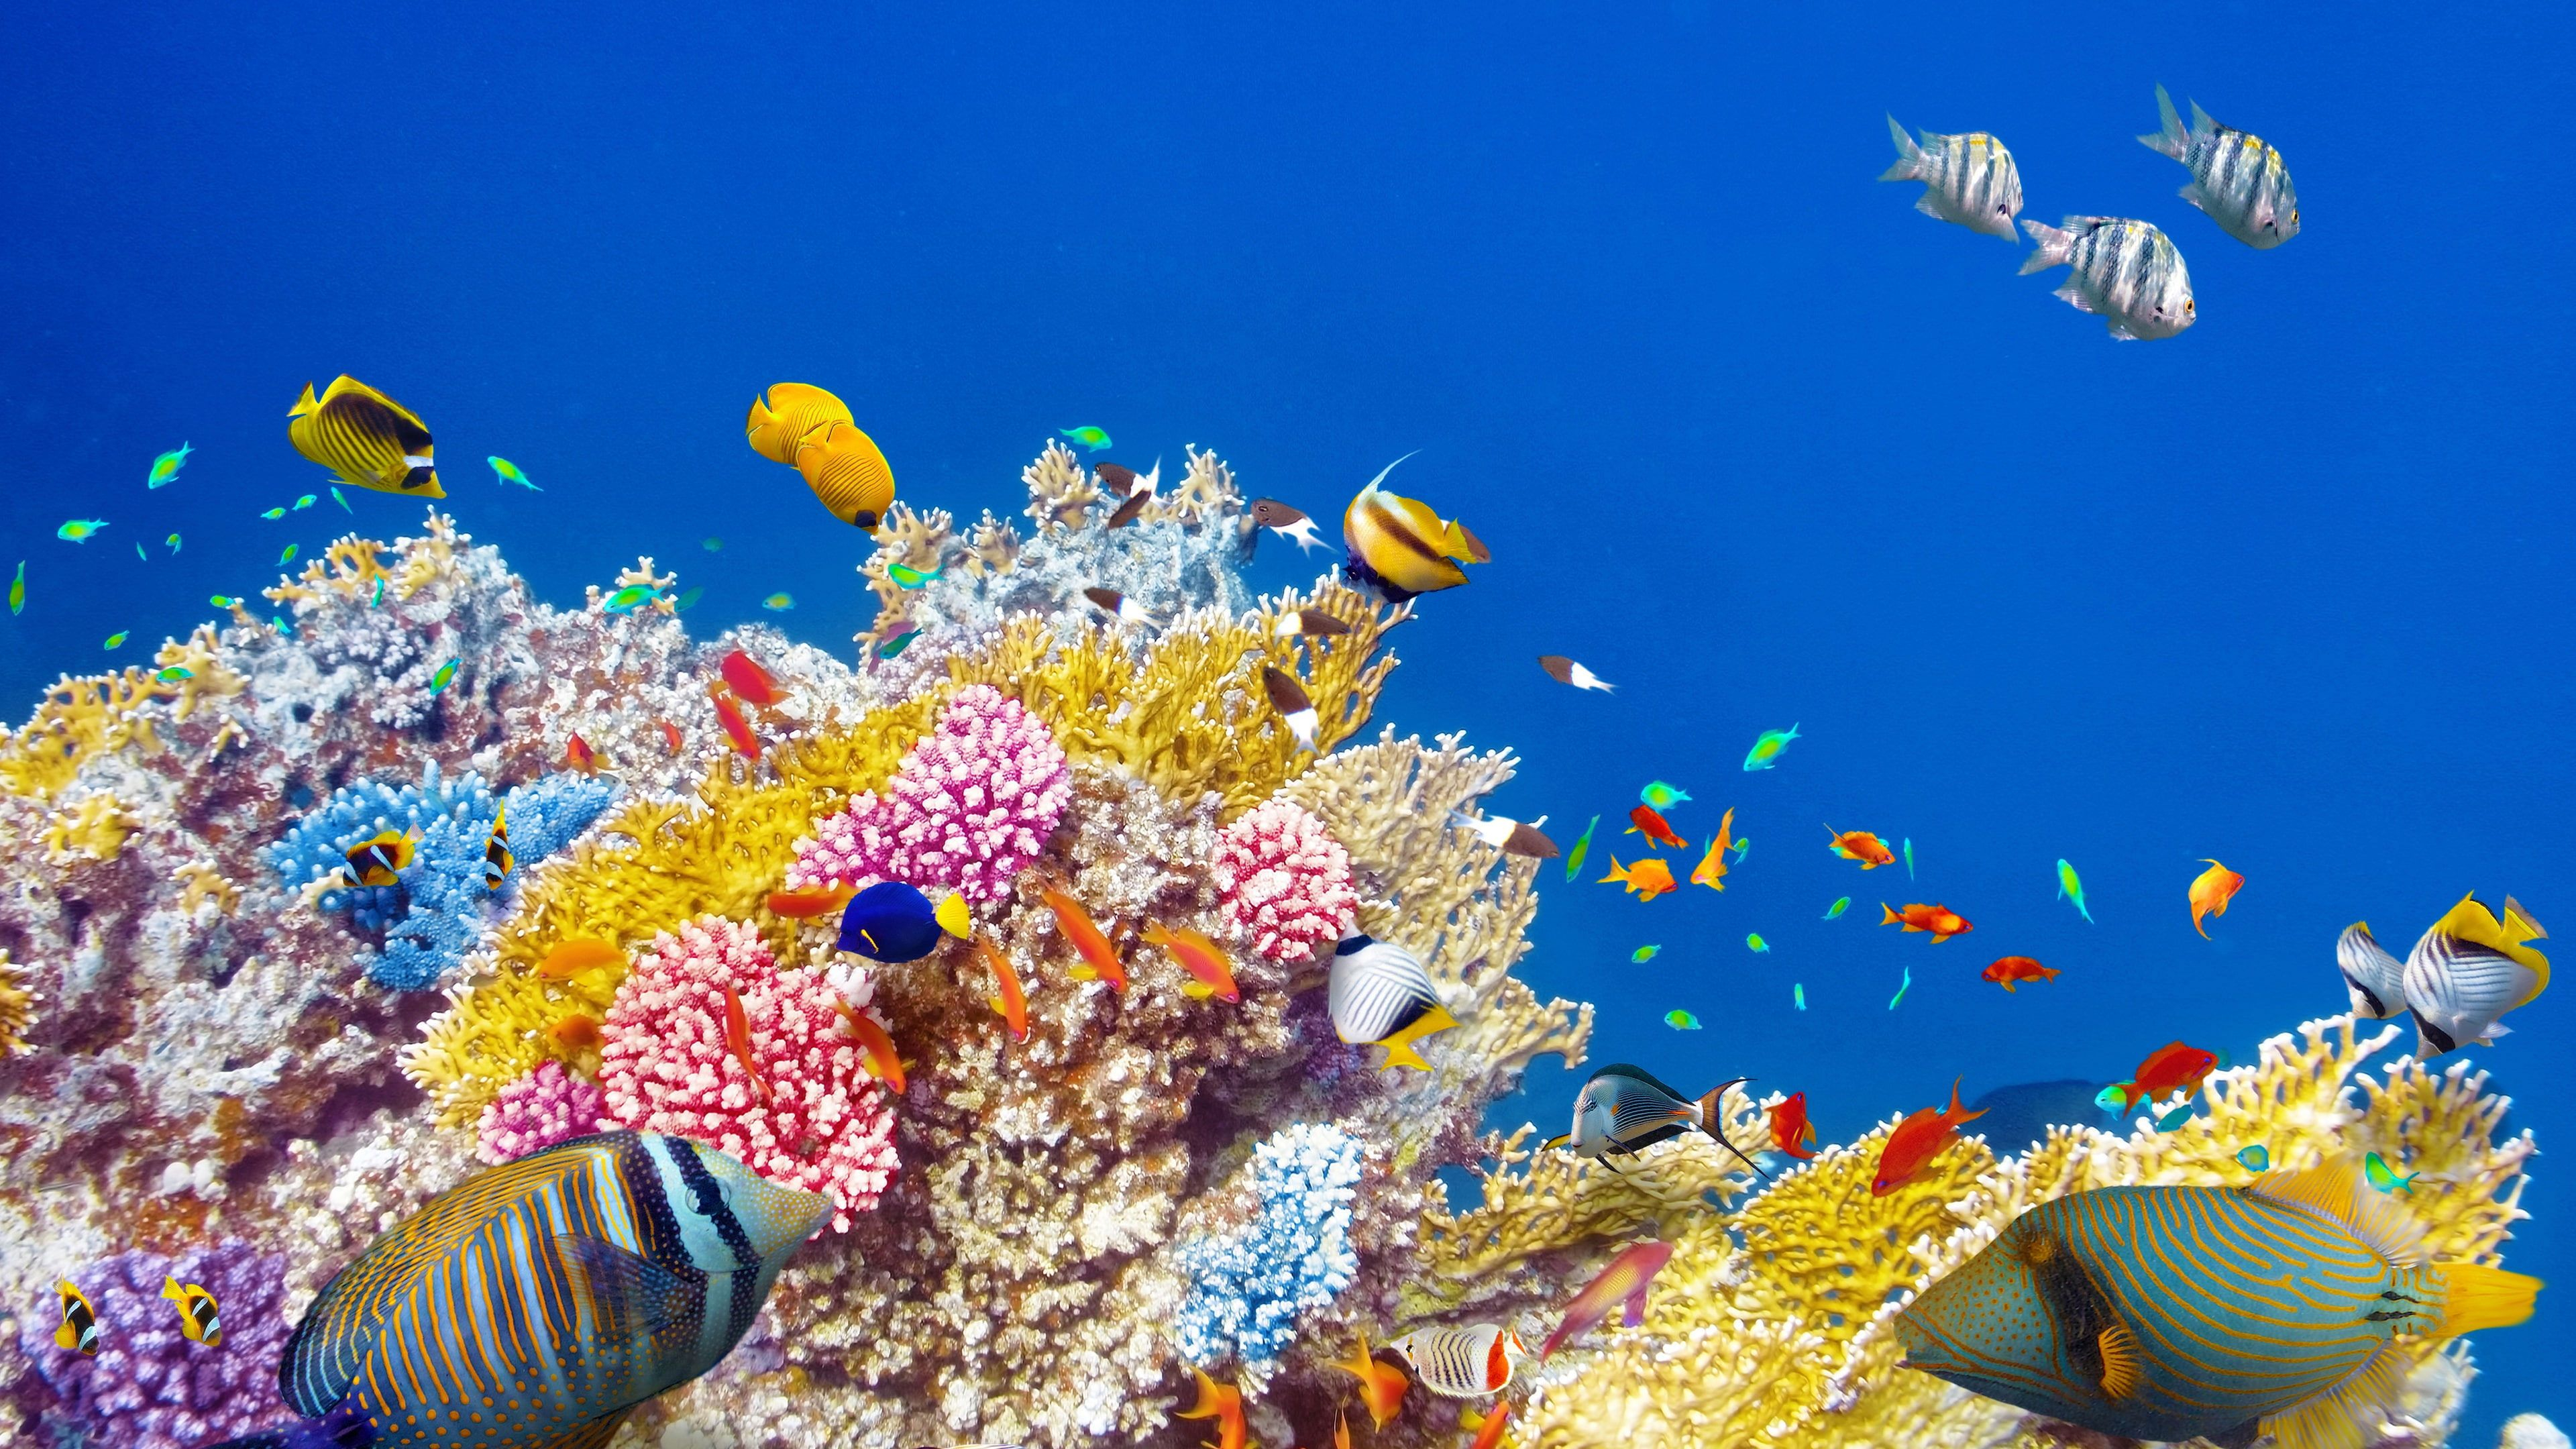 3840x2160 Underwater world wallpaper, coral, tropical fishes, colorful | Fish wallpaper, Tropical fish, World wallpaper